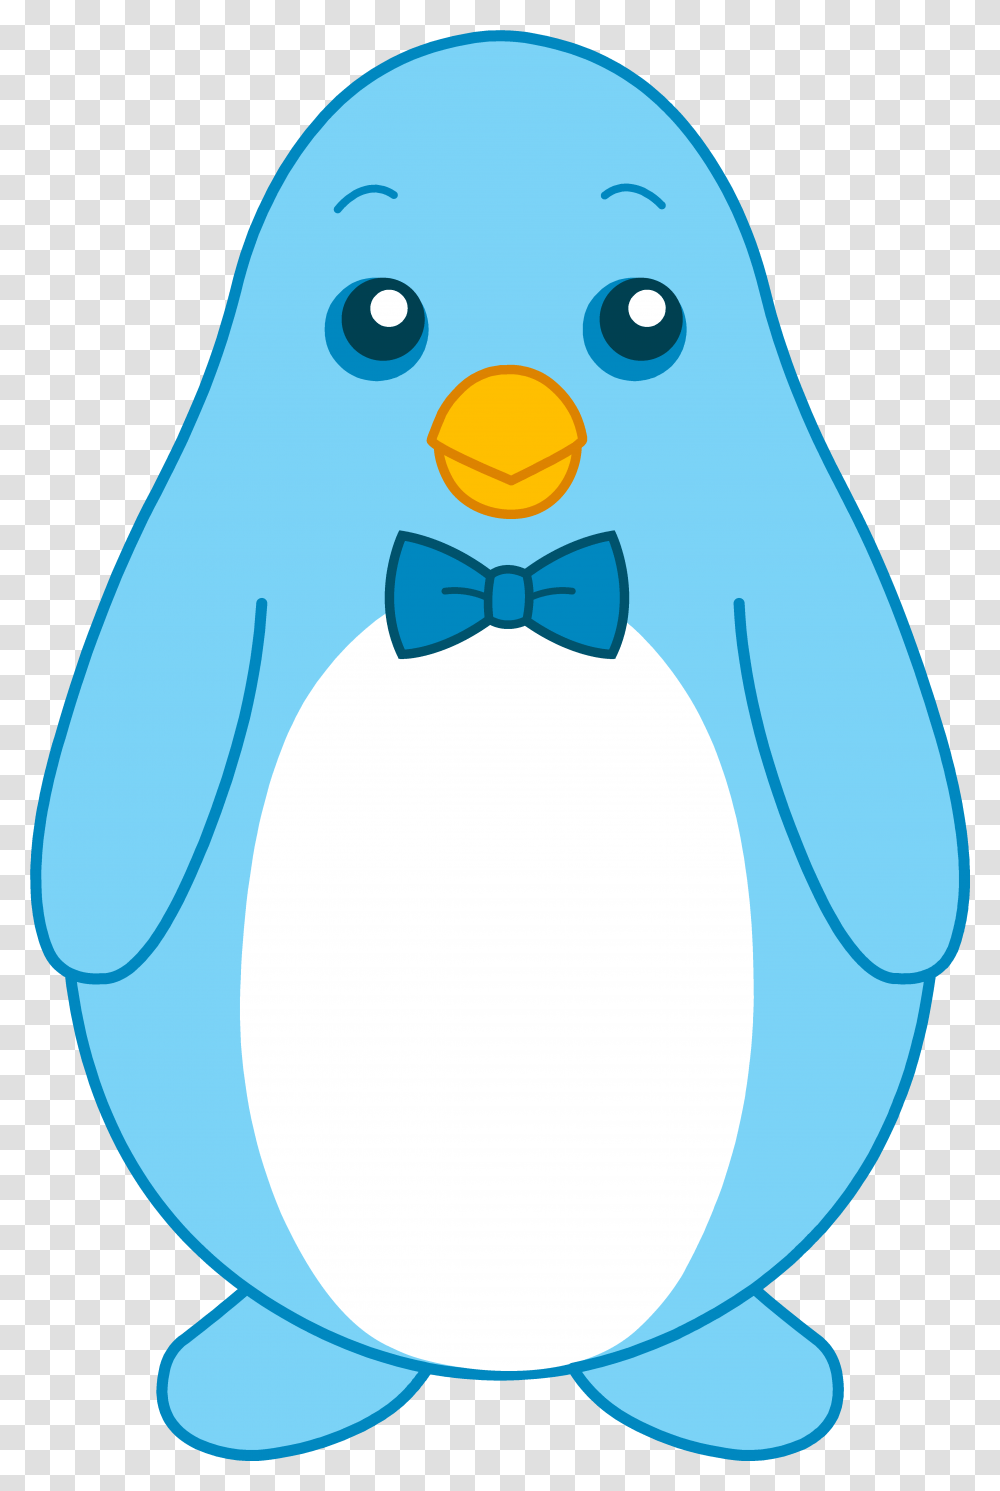 Cartoon Little Blue Penguin With Bow Tie Cartoon Little Blue Penguin, Bird, Animal, Egg, Food Transparent Png